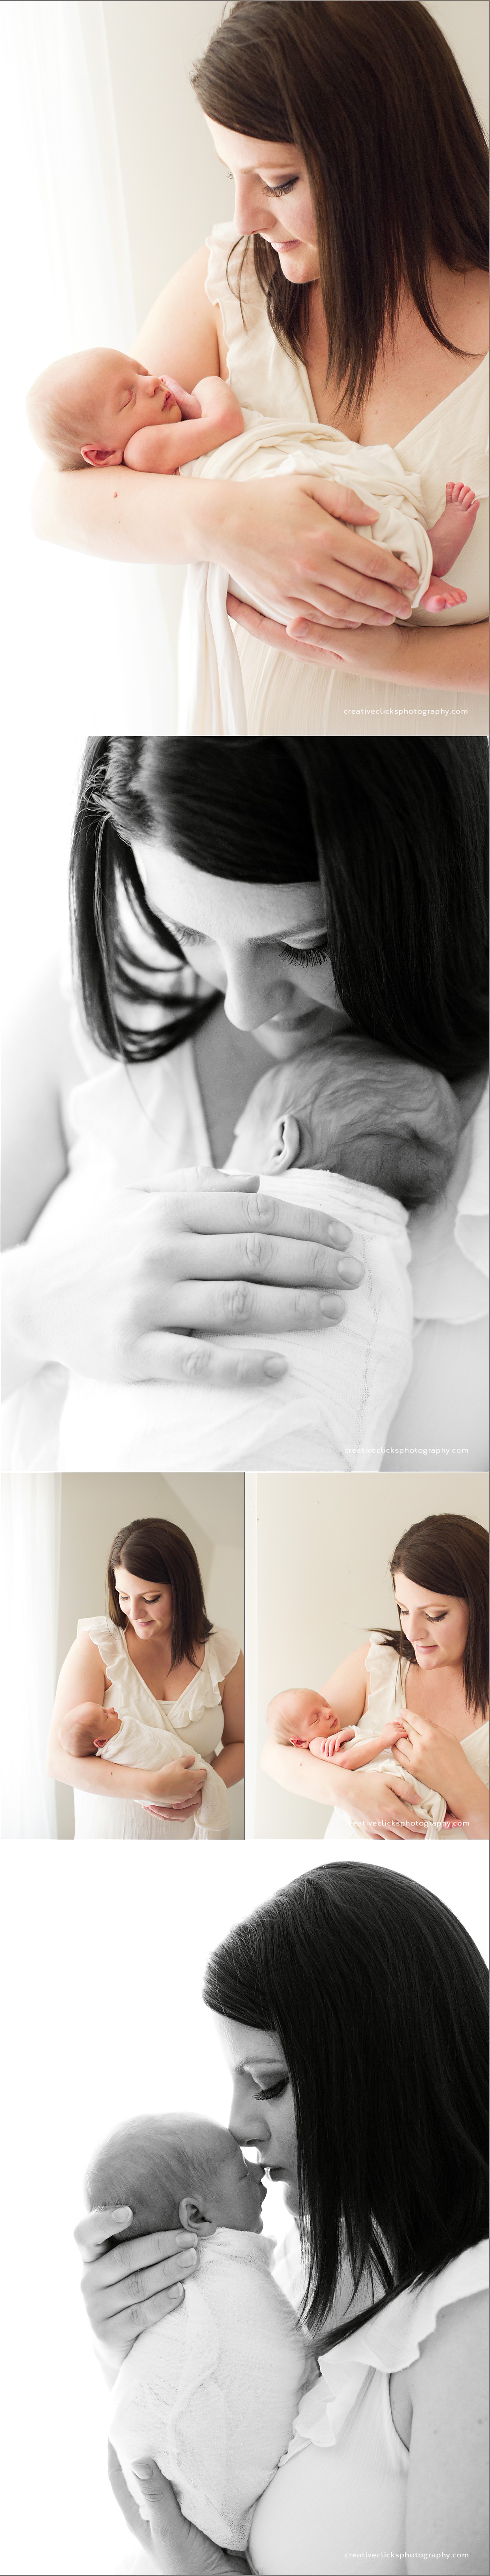 newborn baby boy in his mothers arms